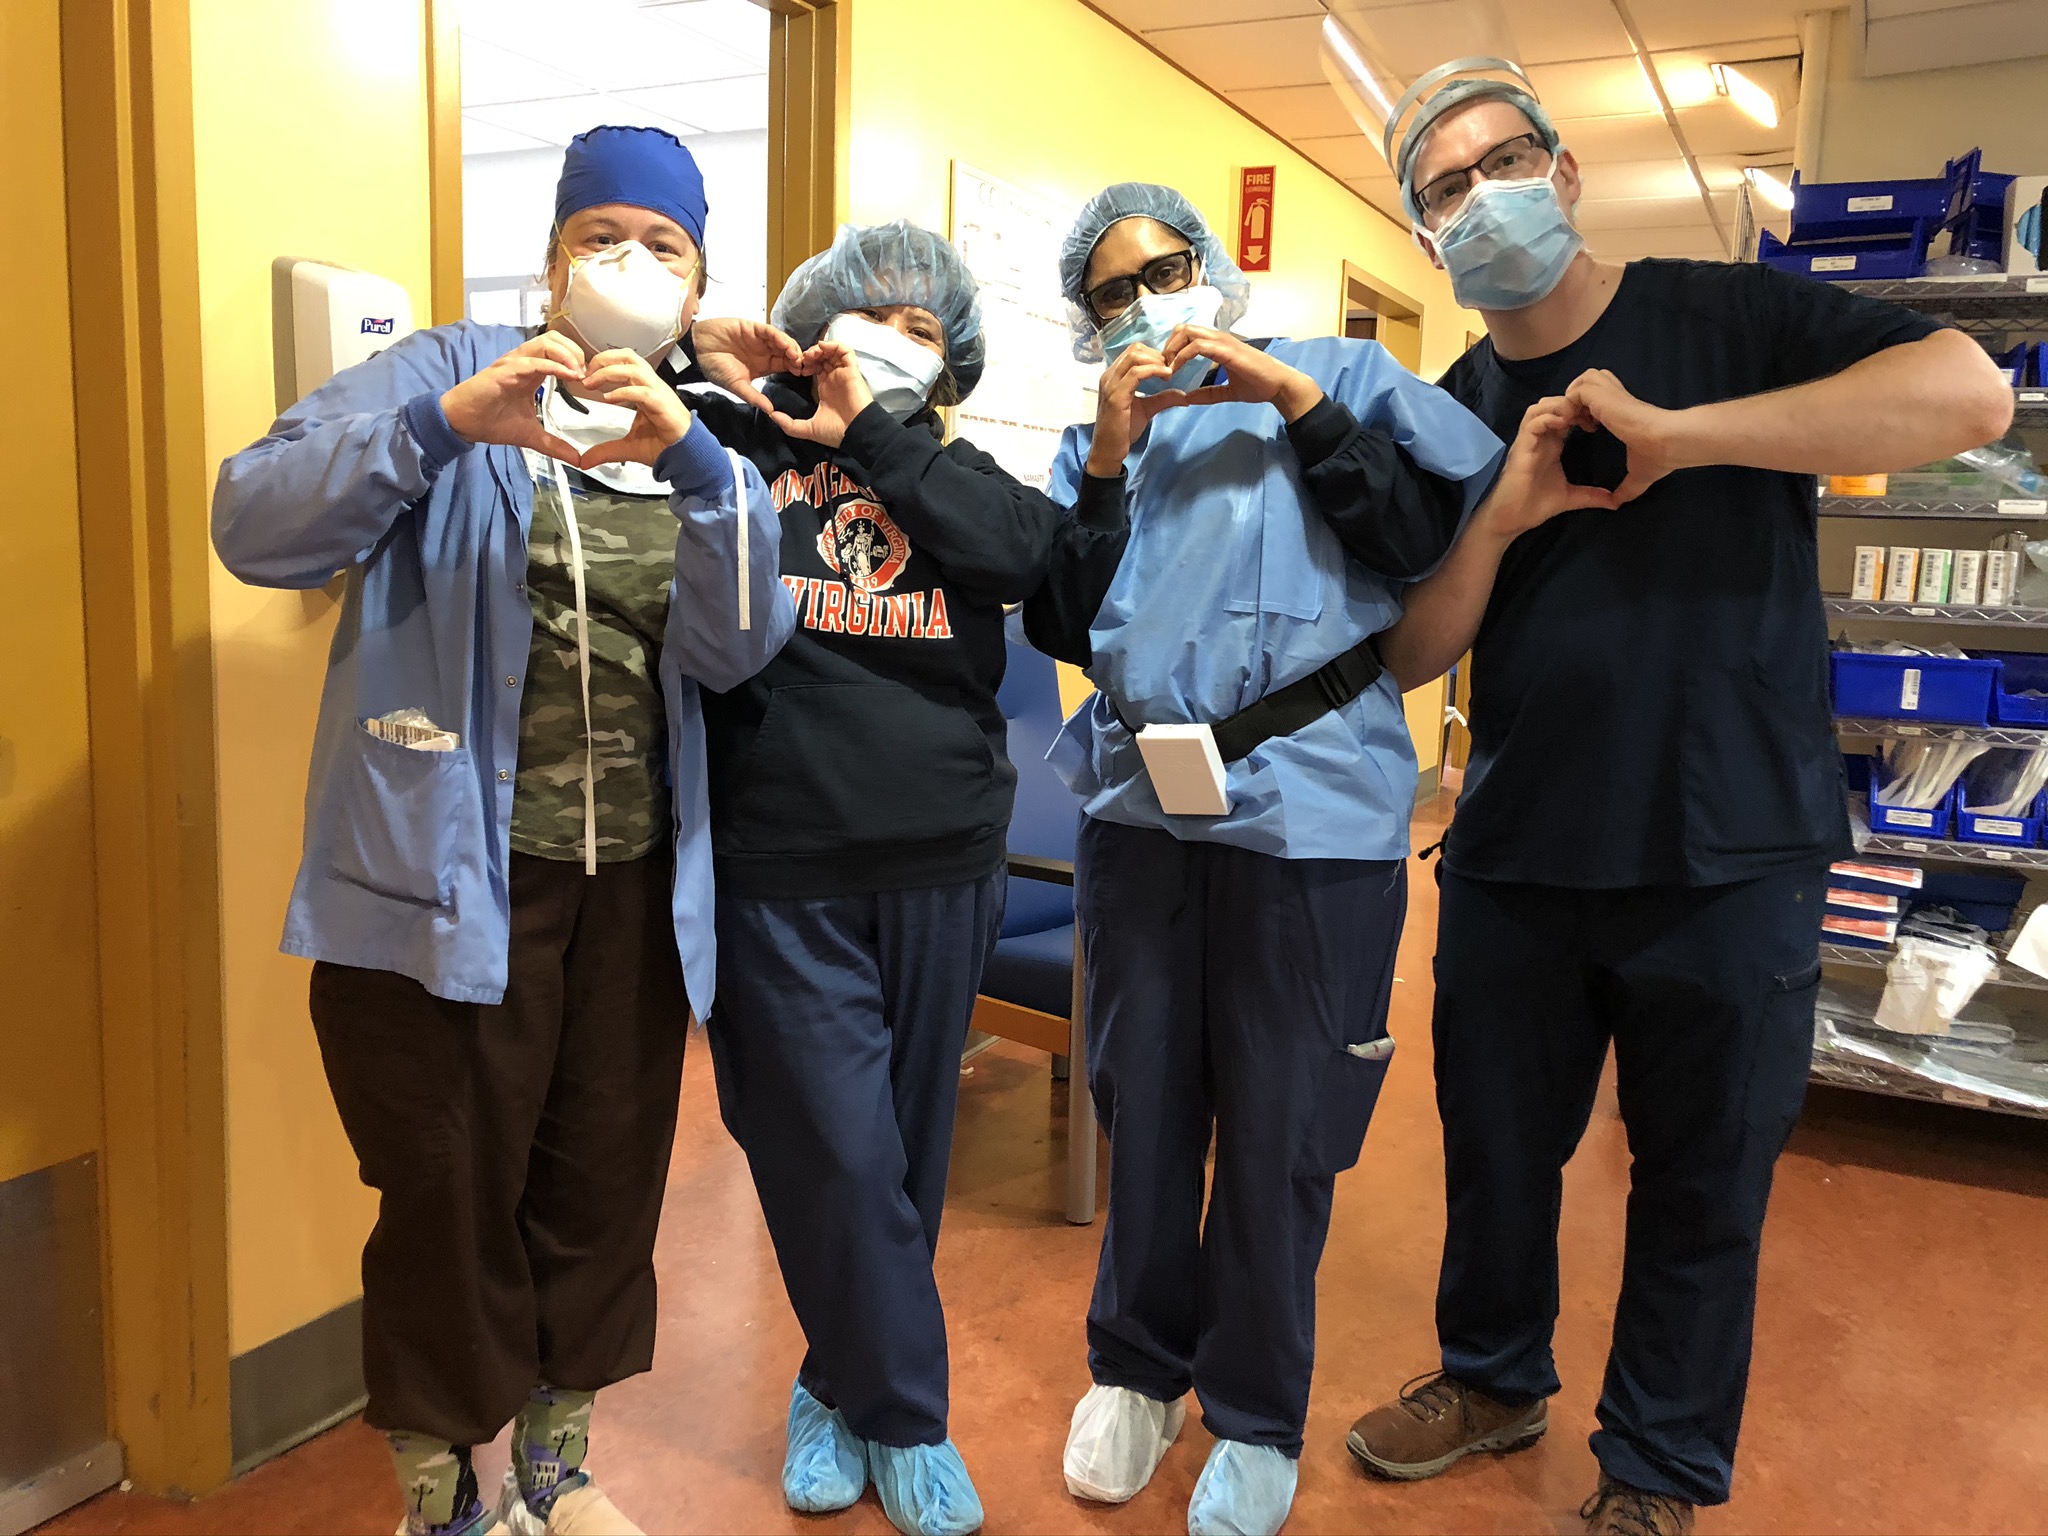 Kelly Casler and her friends wearing PPE making heart shapes with their hands